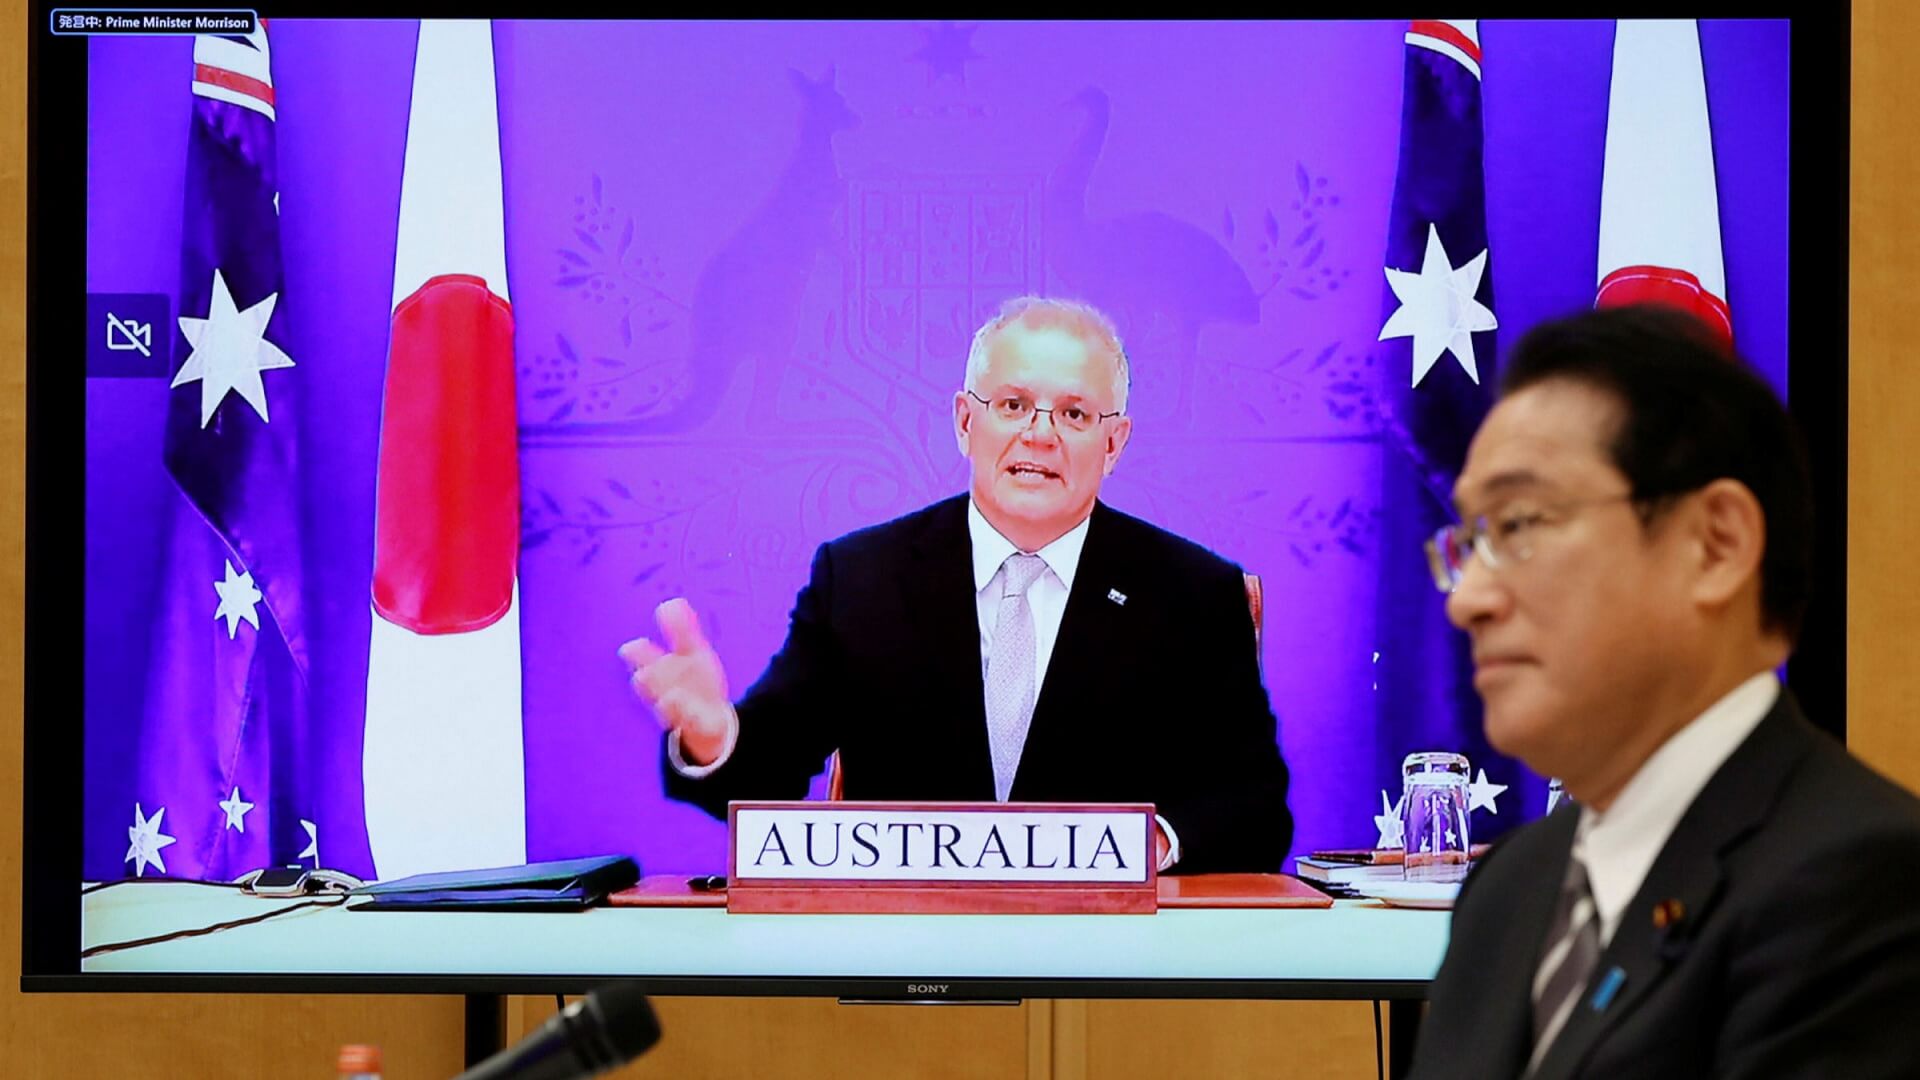 Australia, Japan Sign New Military Agreement, Look to Broaden Ties With Quad, EU, SE Asia